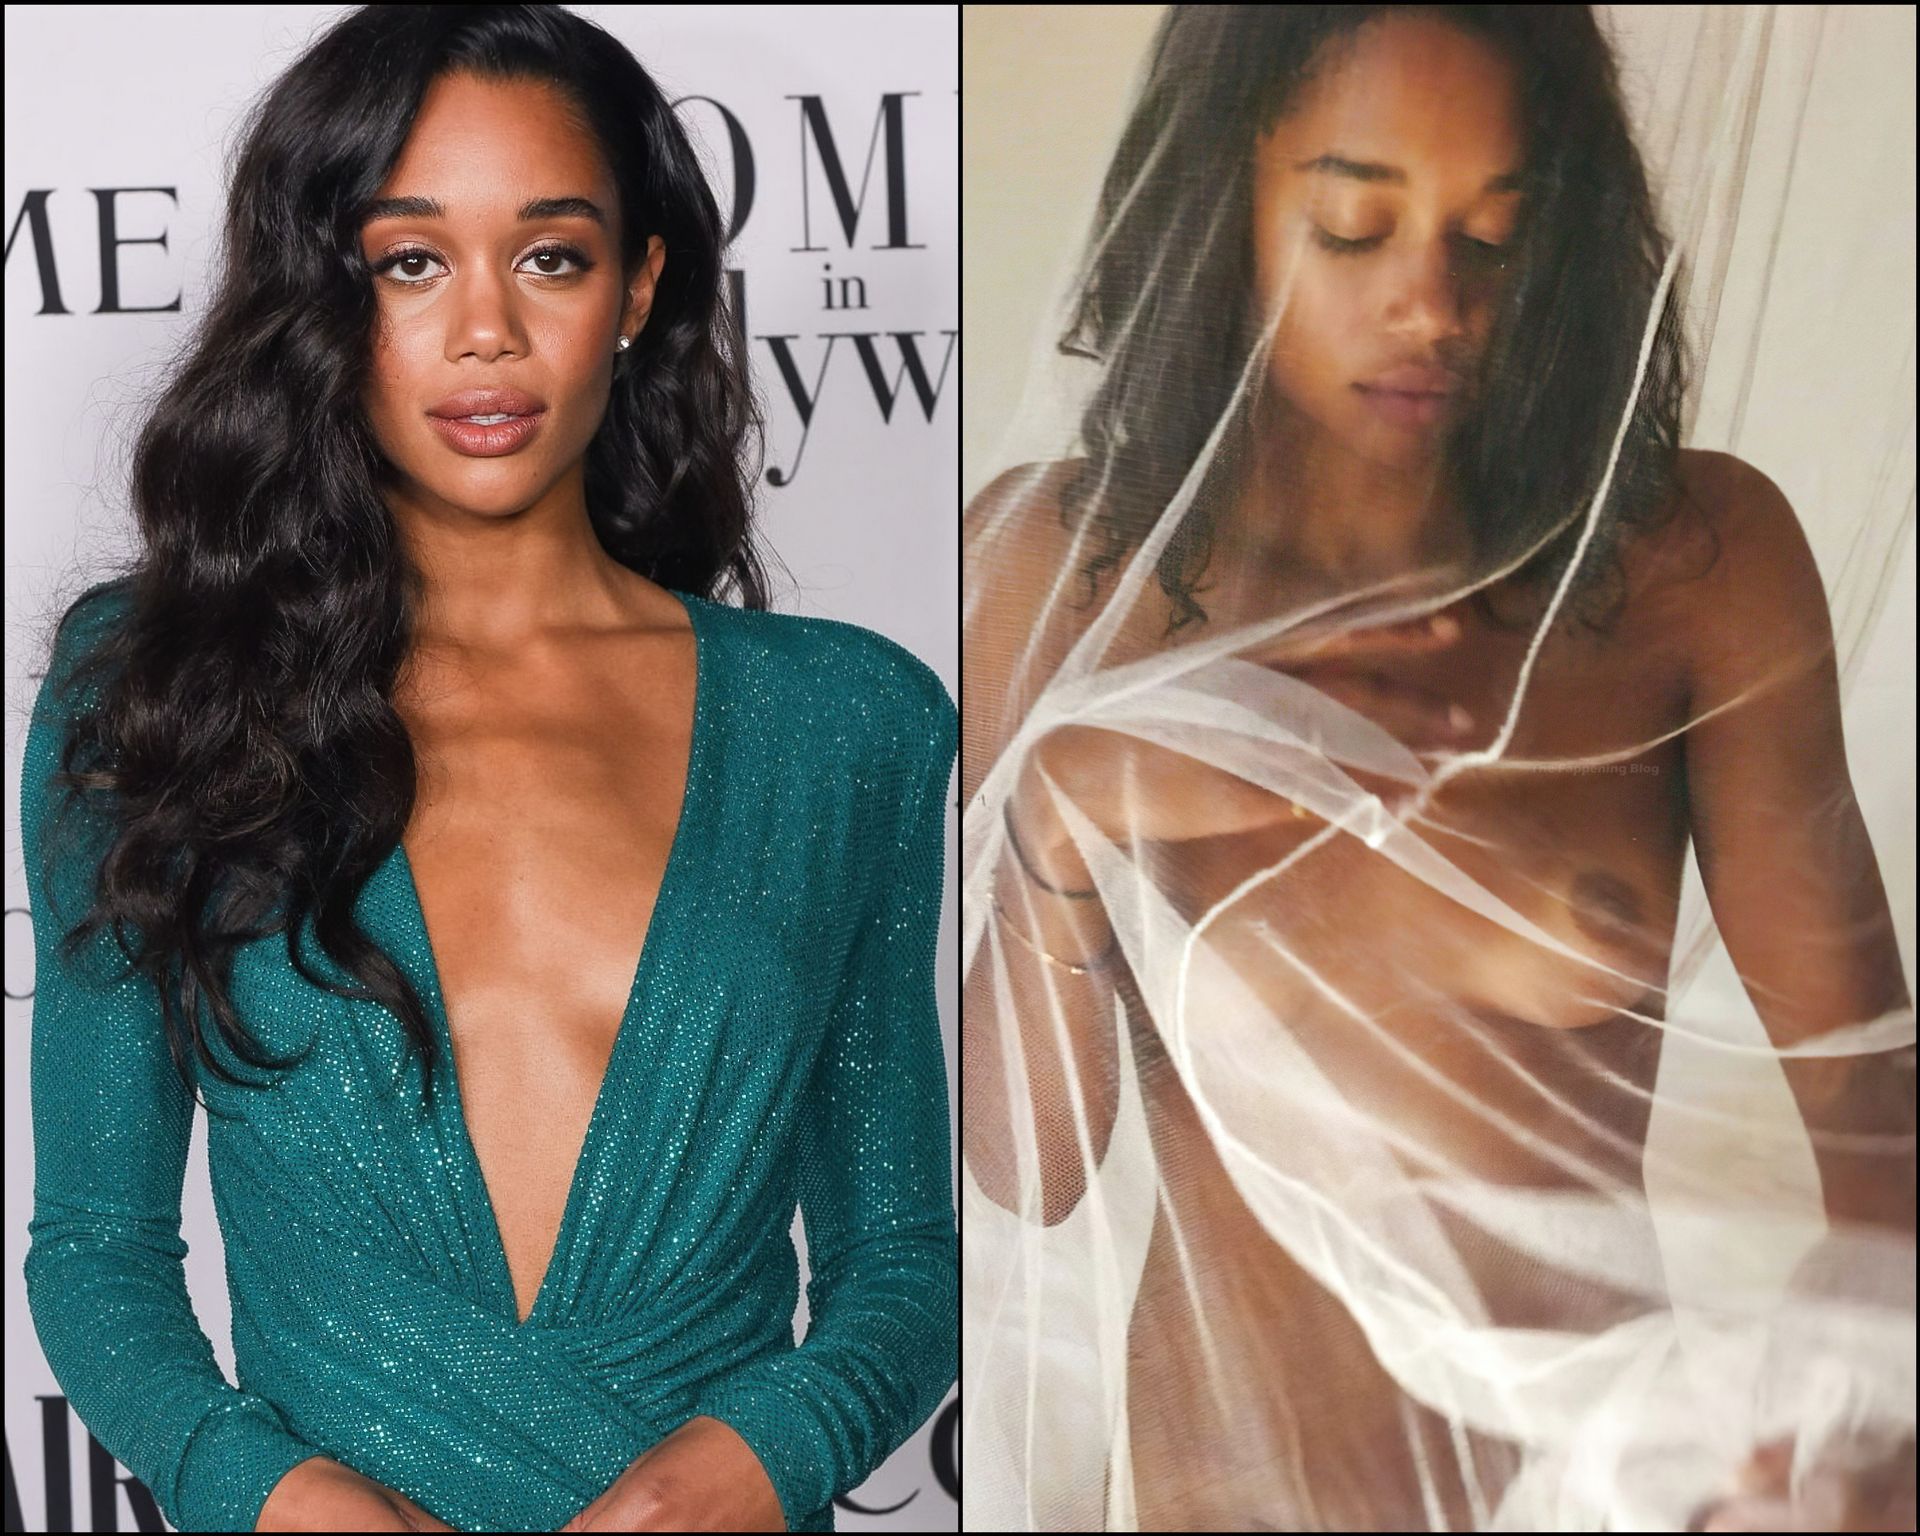 callie ann hughes recommends laura harrier naked pic